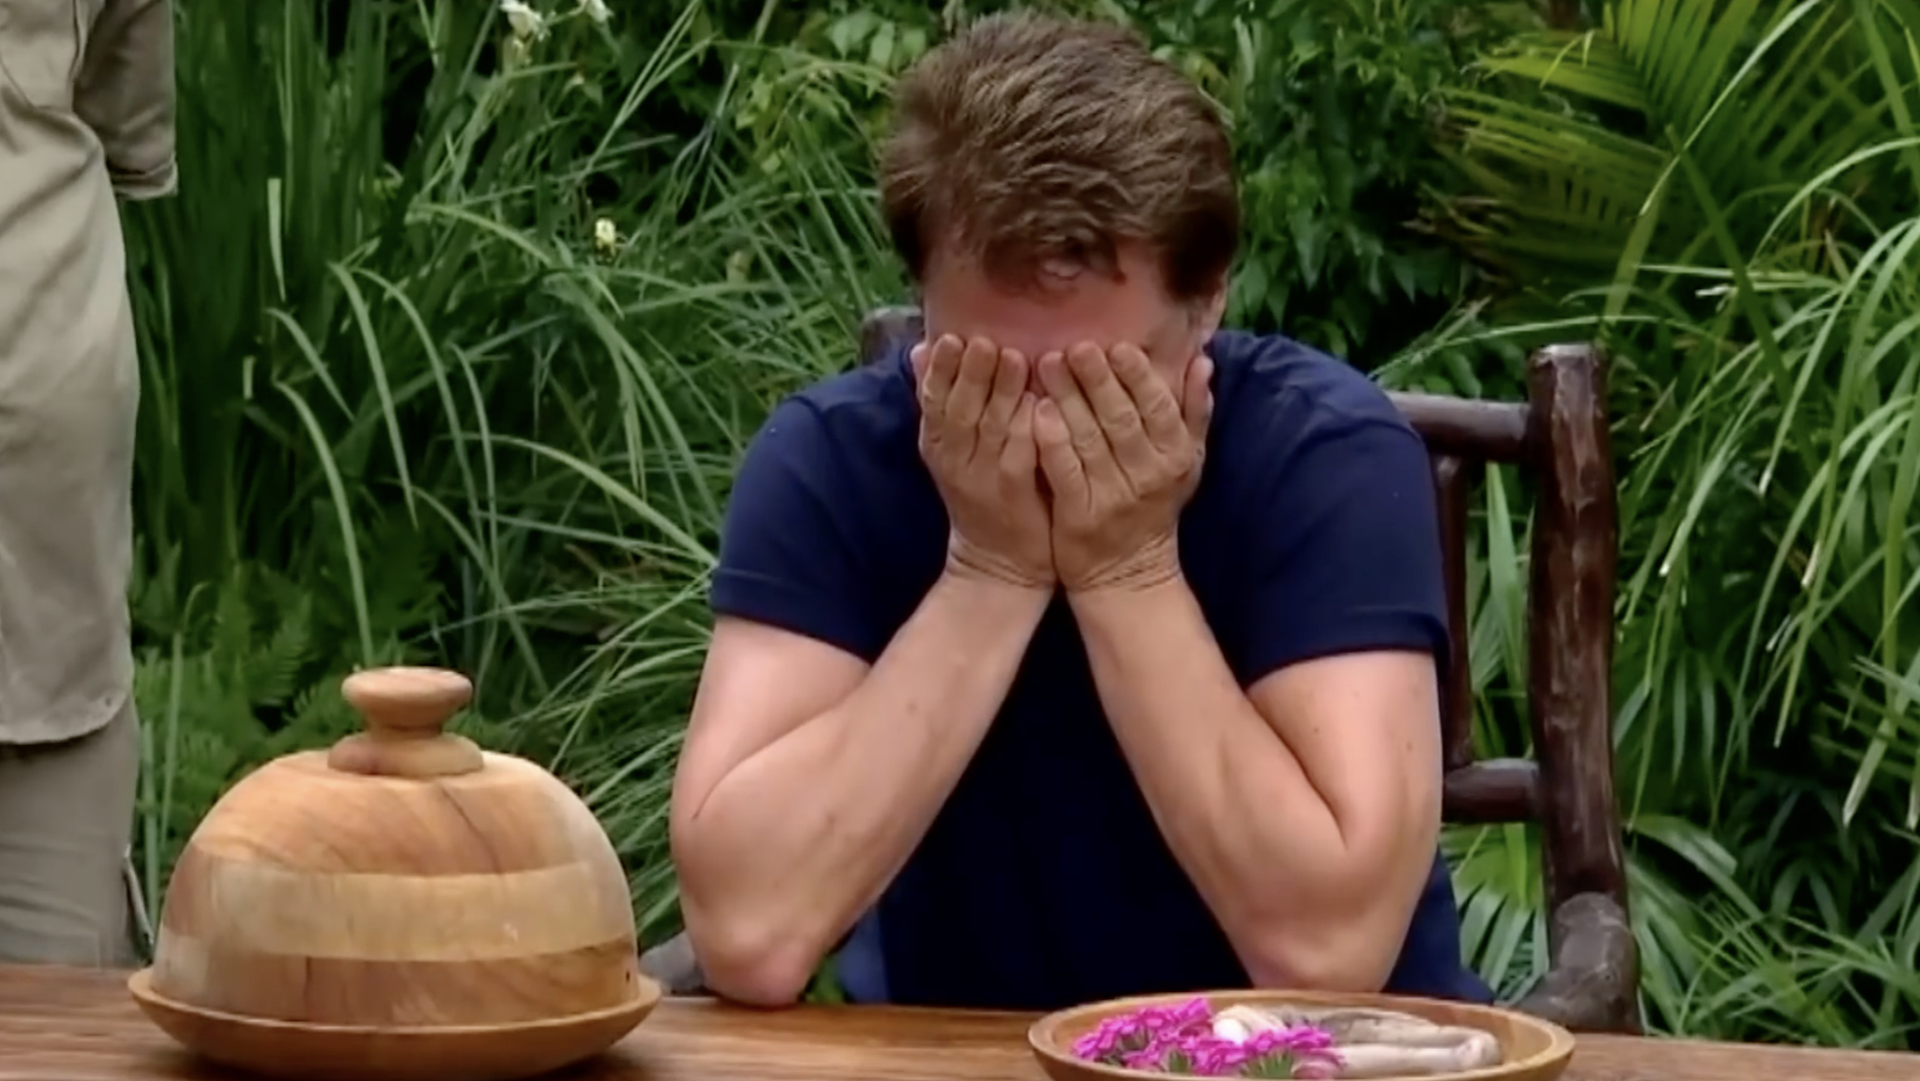 John Barrowman on I'm A Celebrity... Get Me Out Of Here!